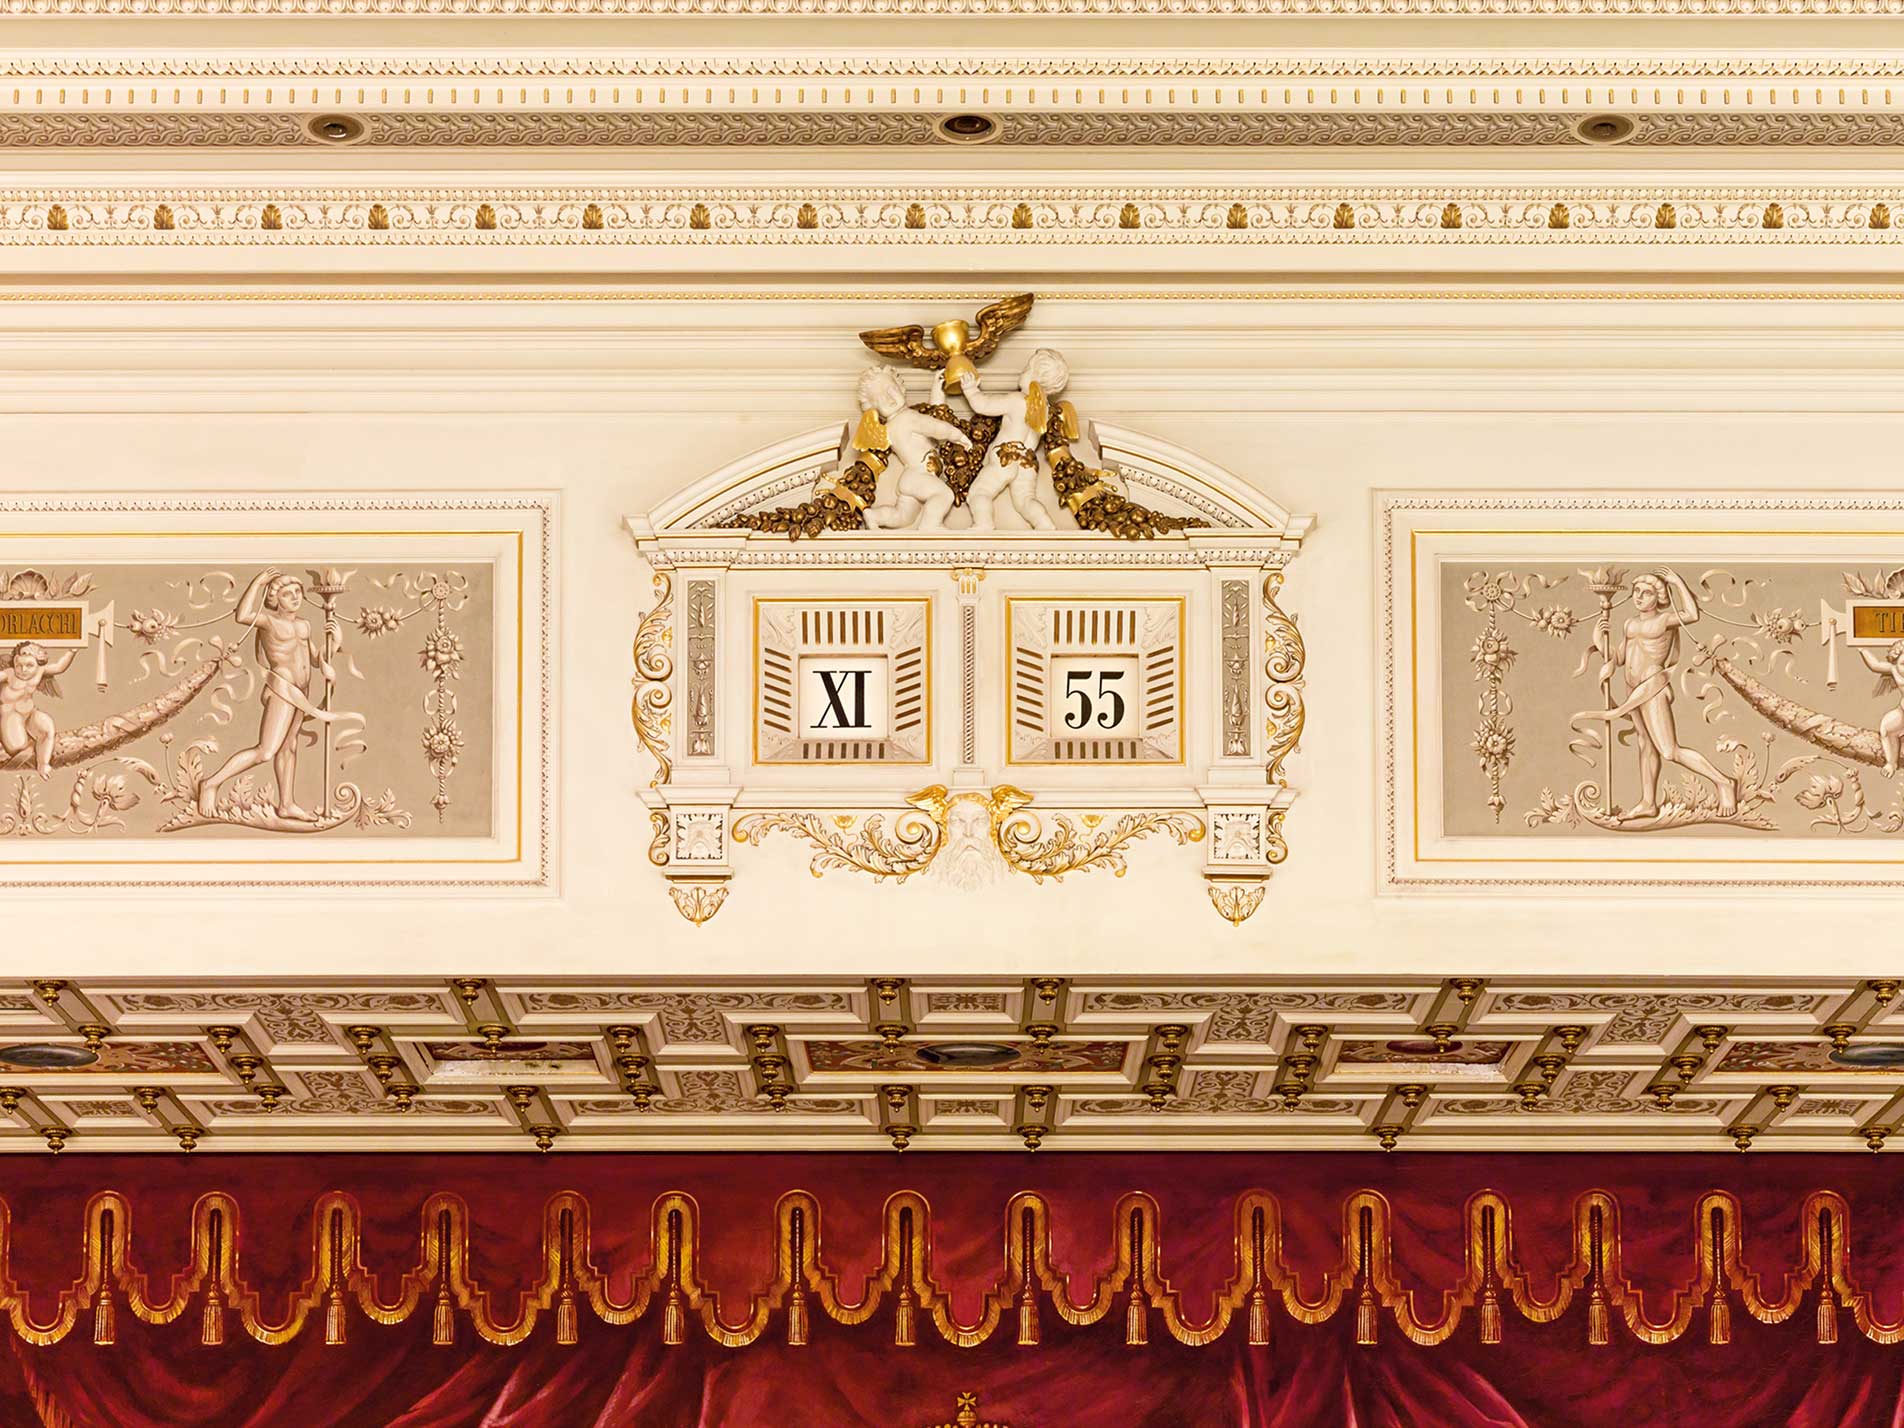 The five minute digital display clock above the stage at the Dresden Opera House for A Collected Man Lonodn